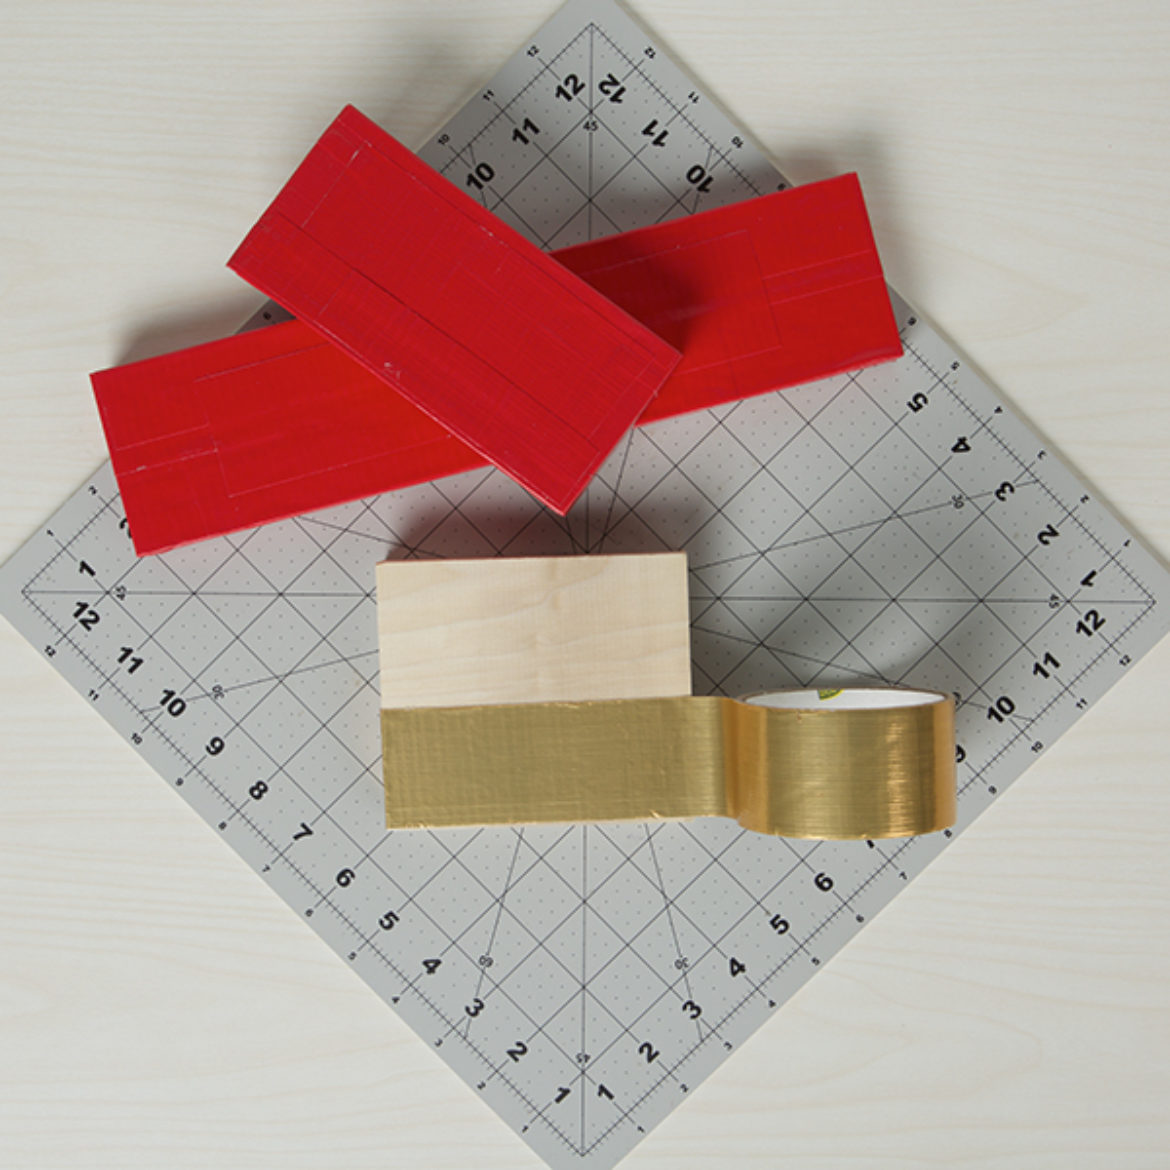 Three blocks covered in red and gold colored Duck Tape